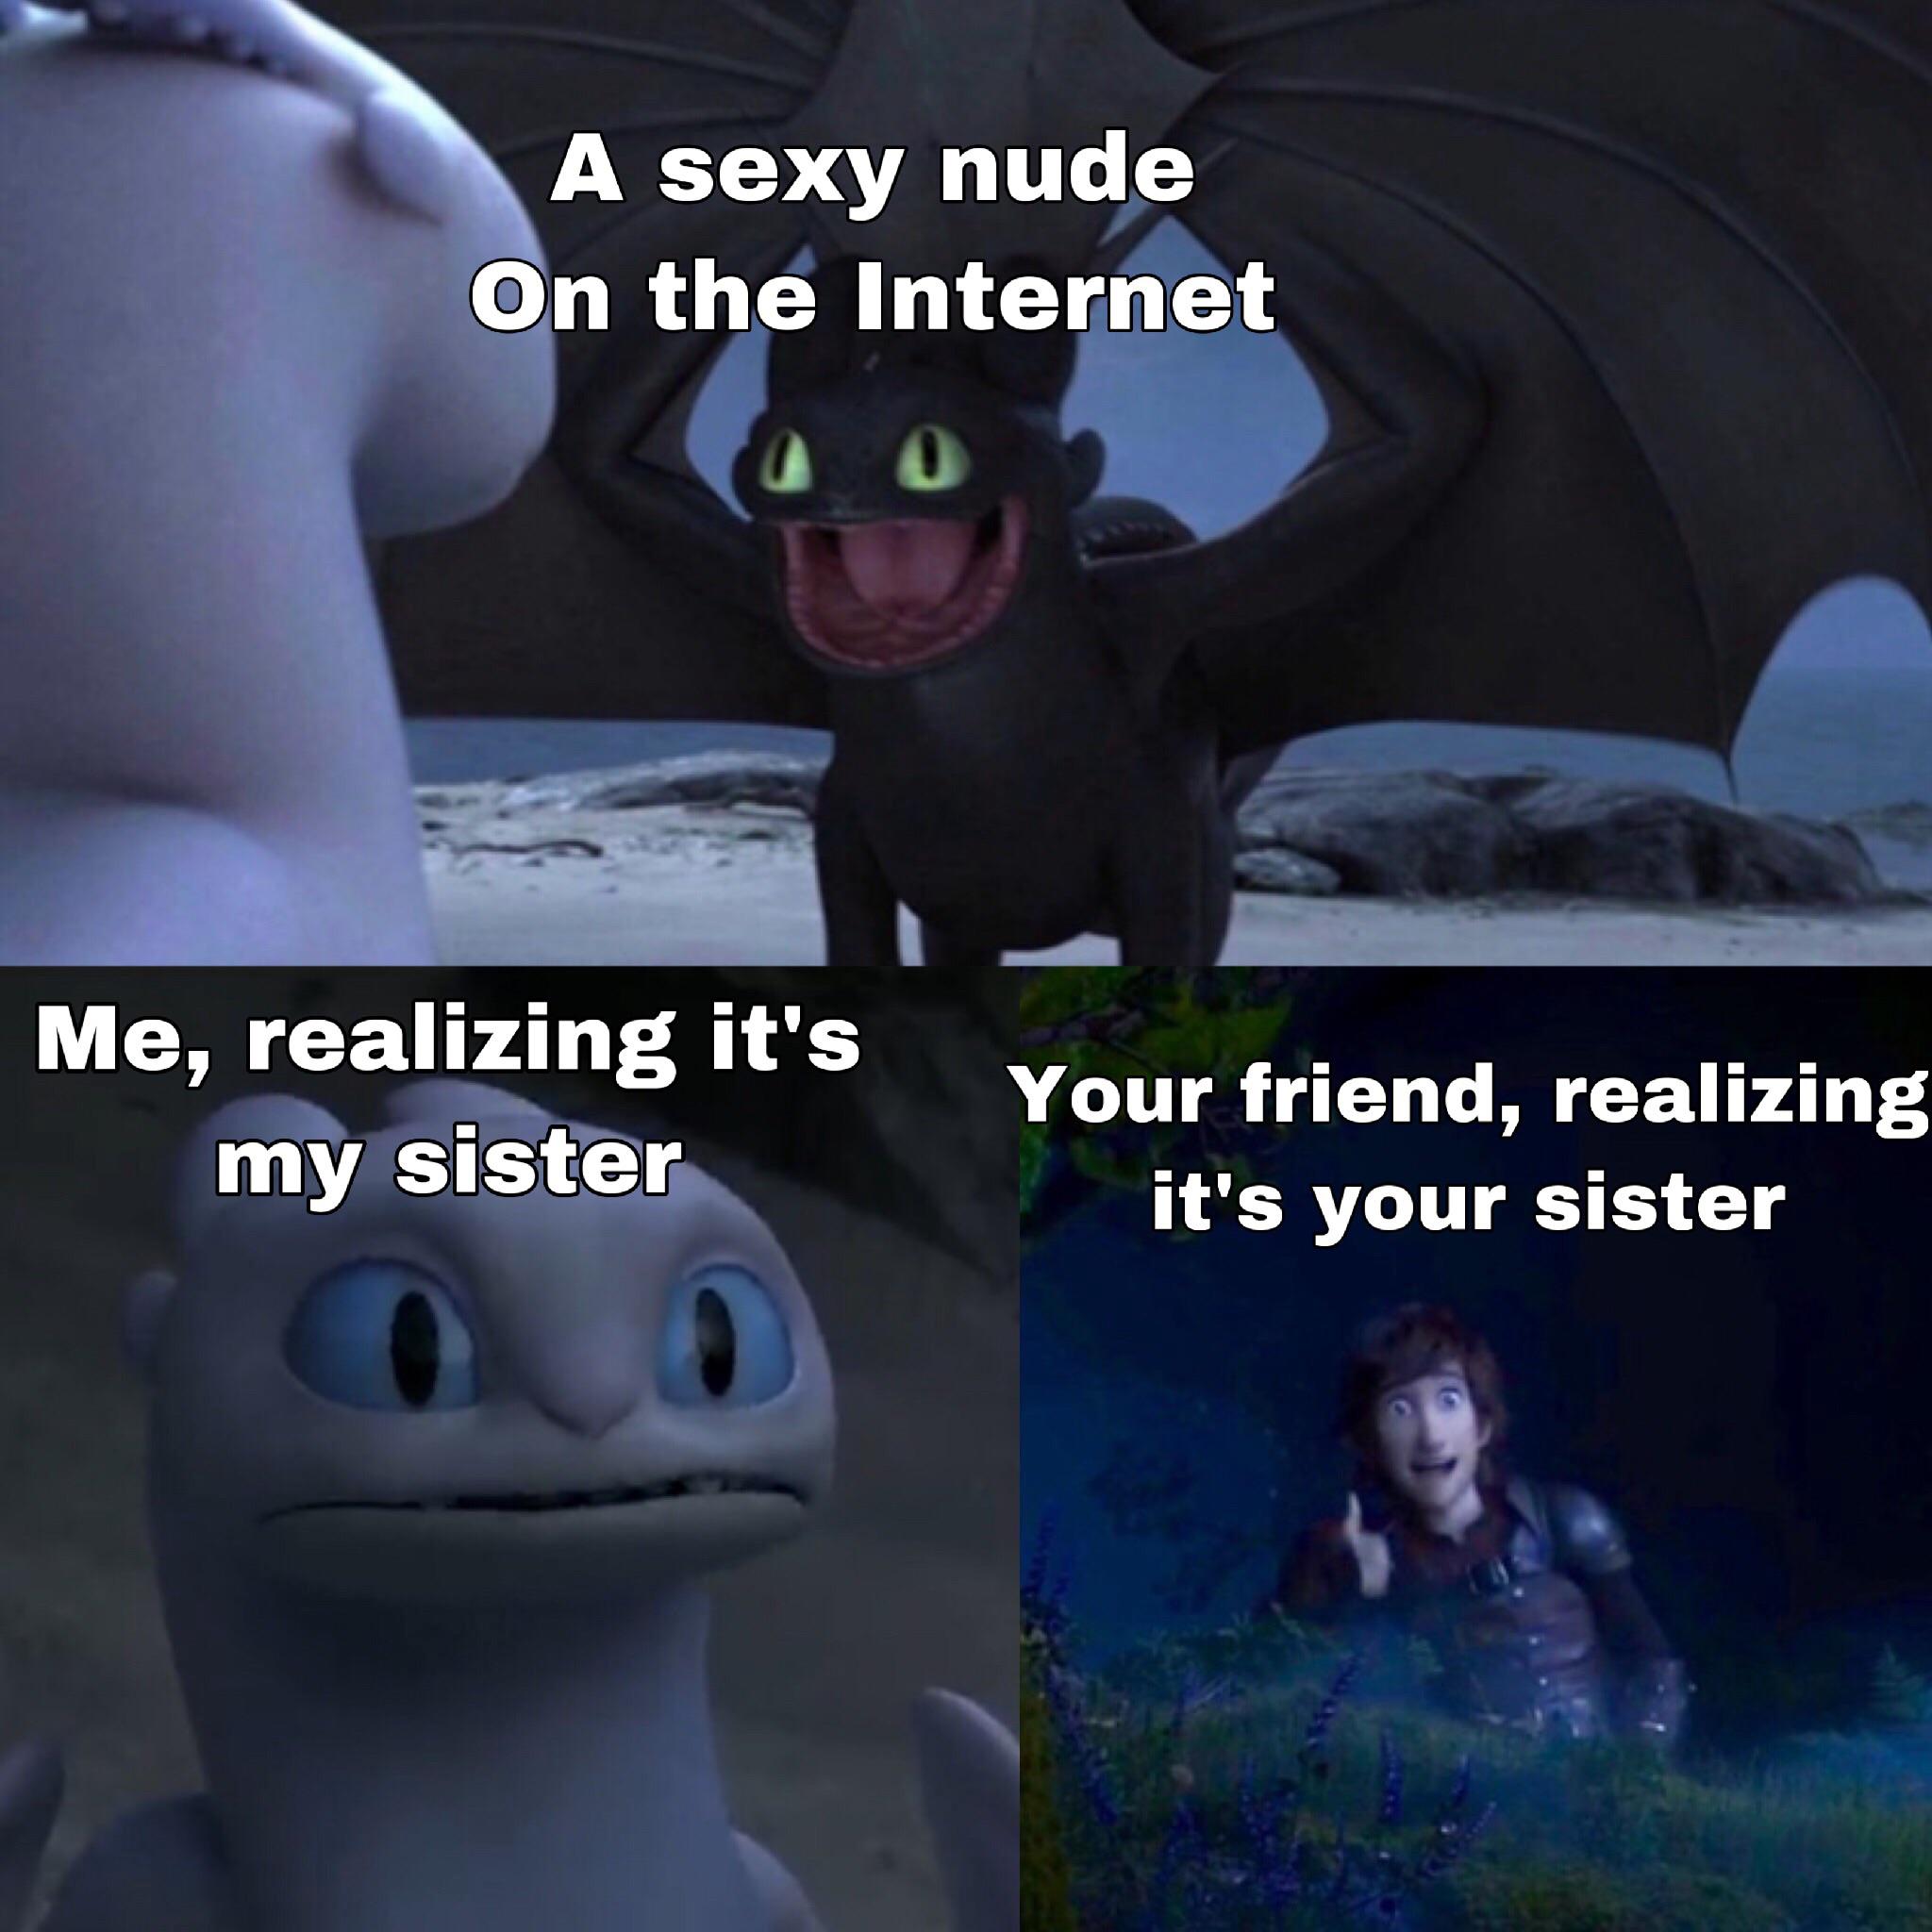 toothless how to train your dragon meme about Meme - A sexy nude On the Internet Me, realizing it's my sister Your friend, realizing it's your sister